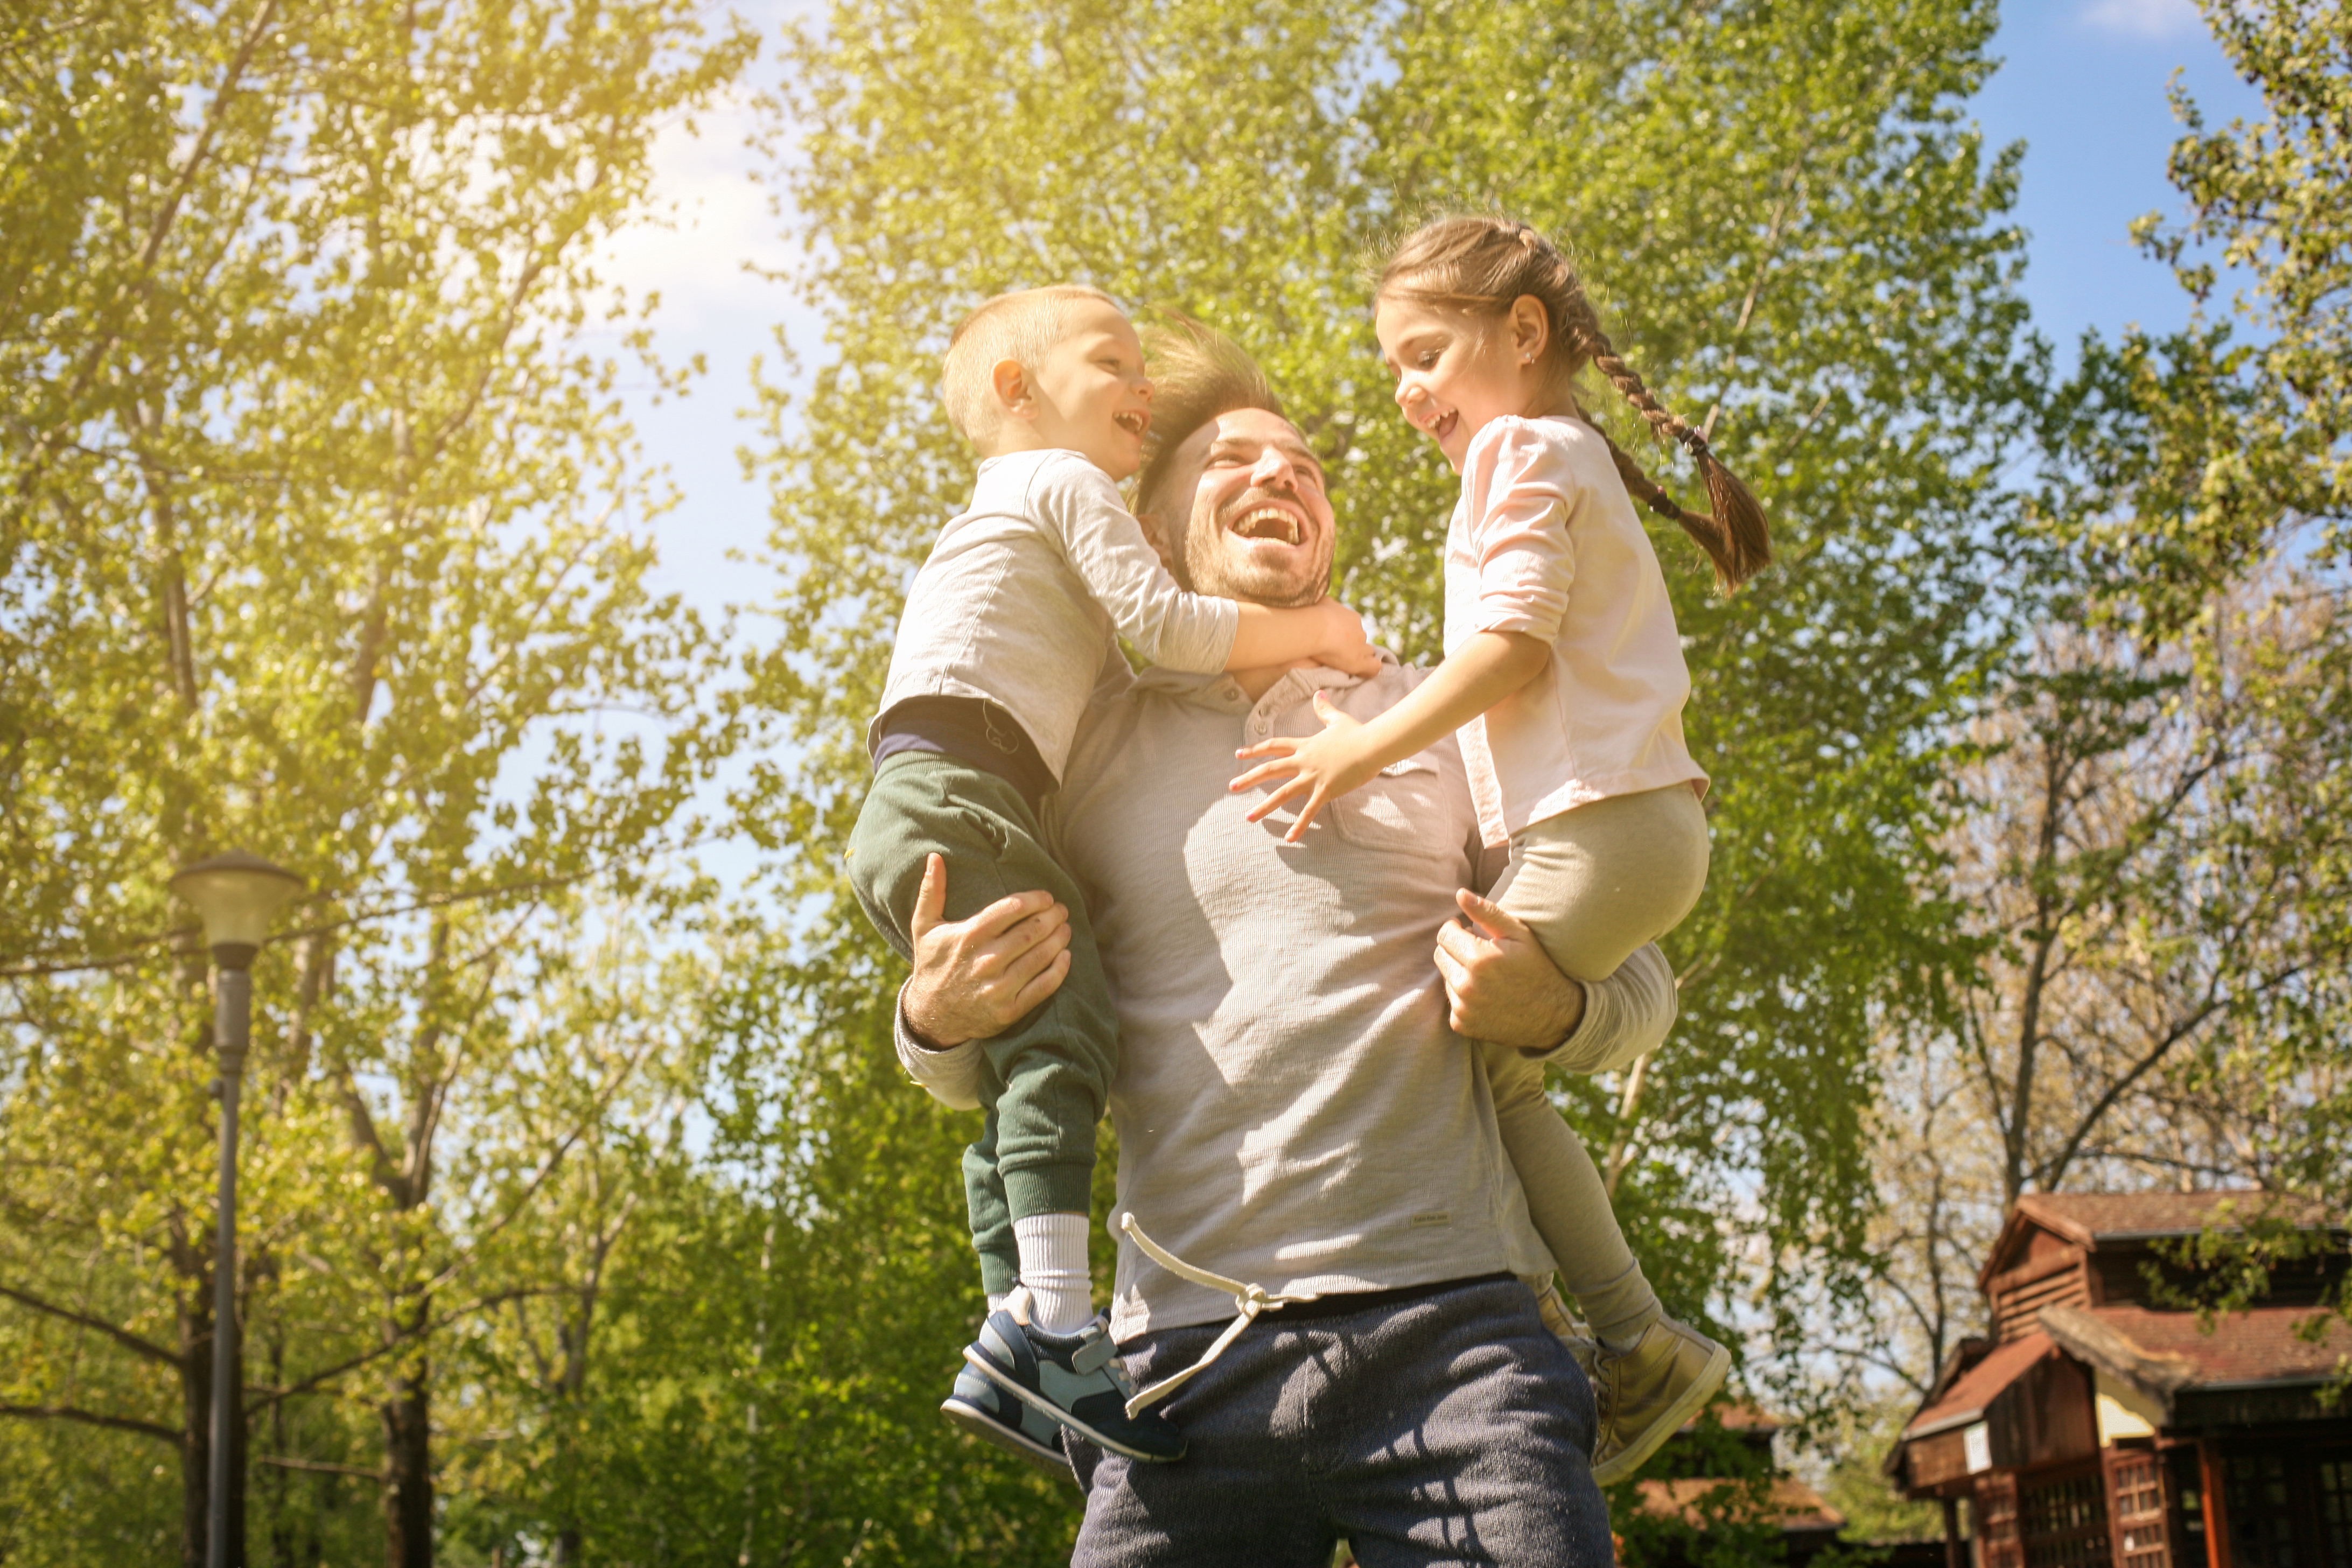 A cheerful father playing with his children in the meadow | Source: Shutterstock